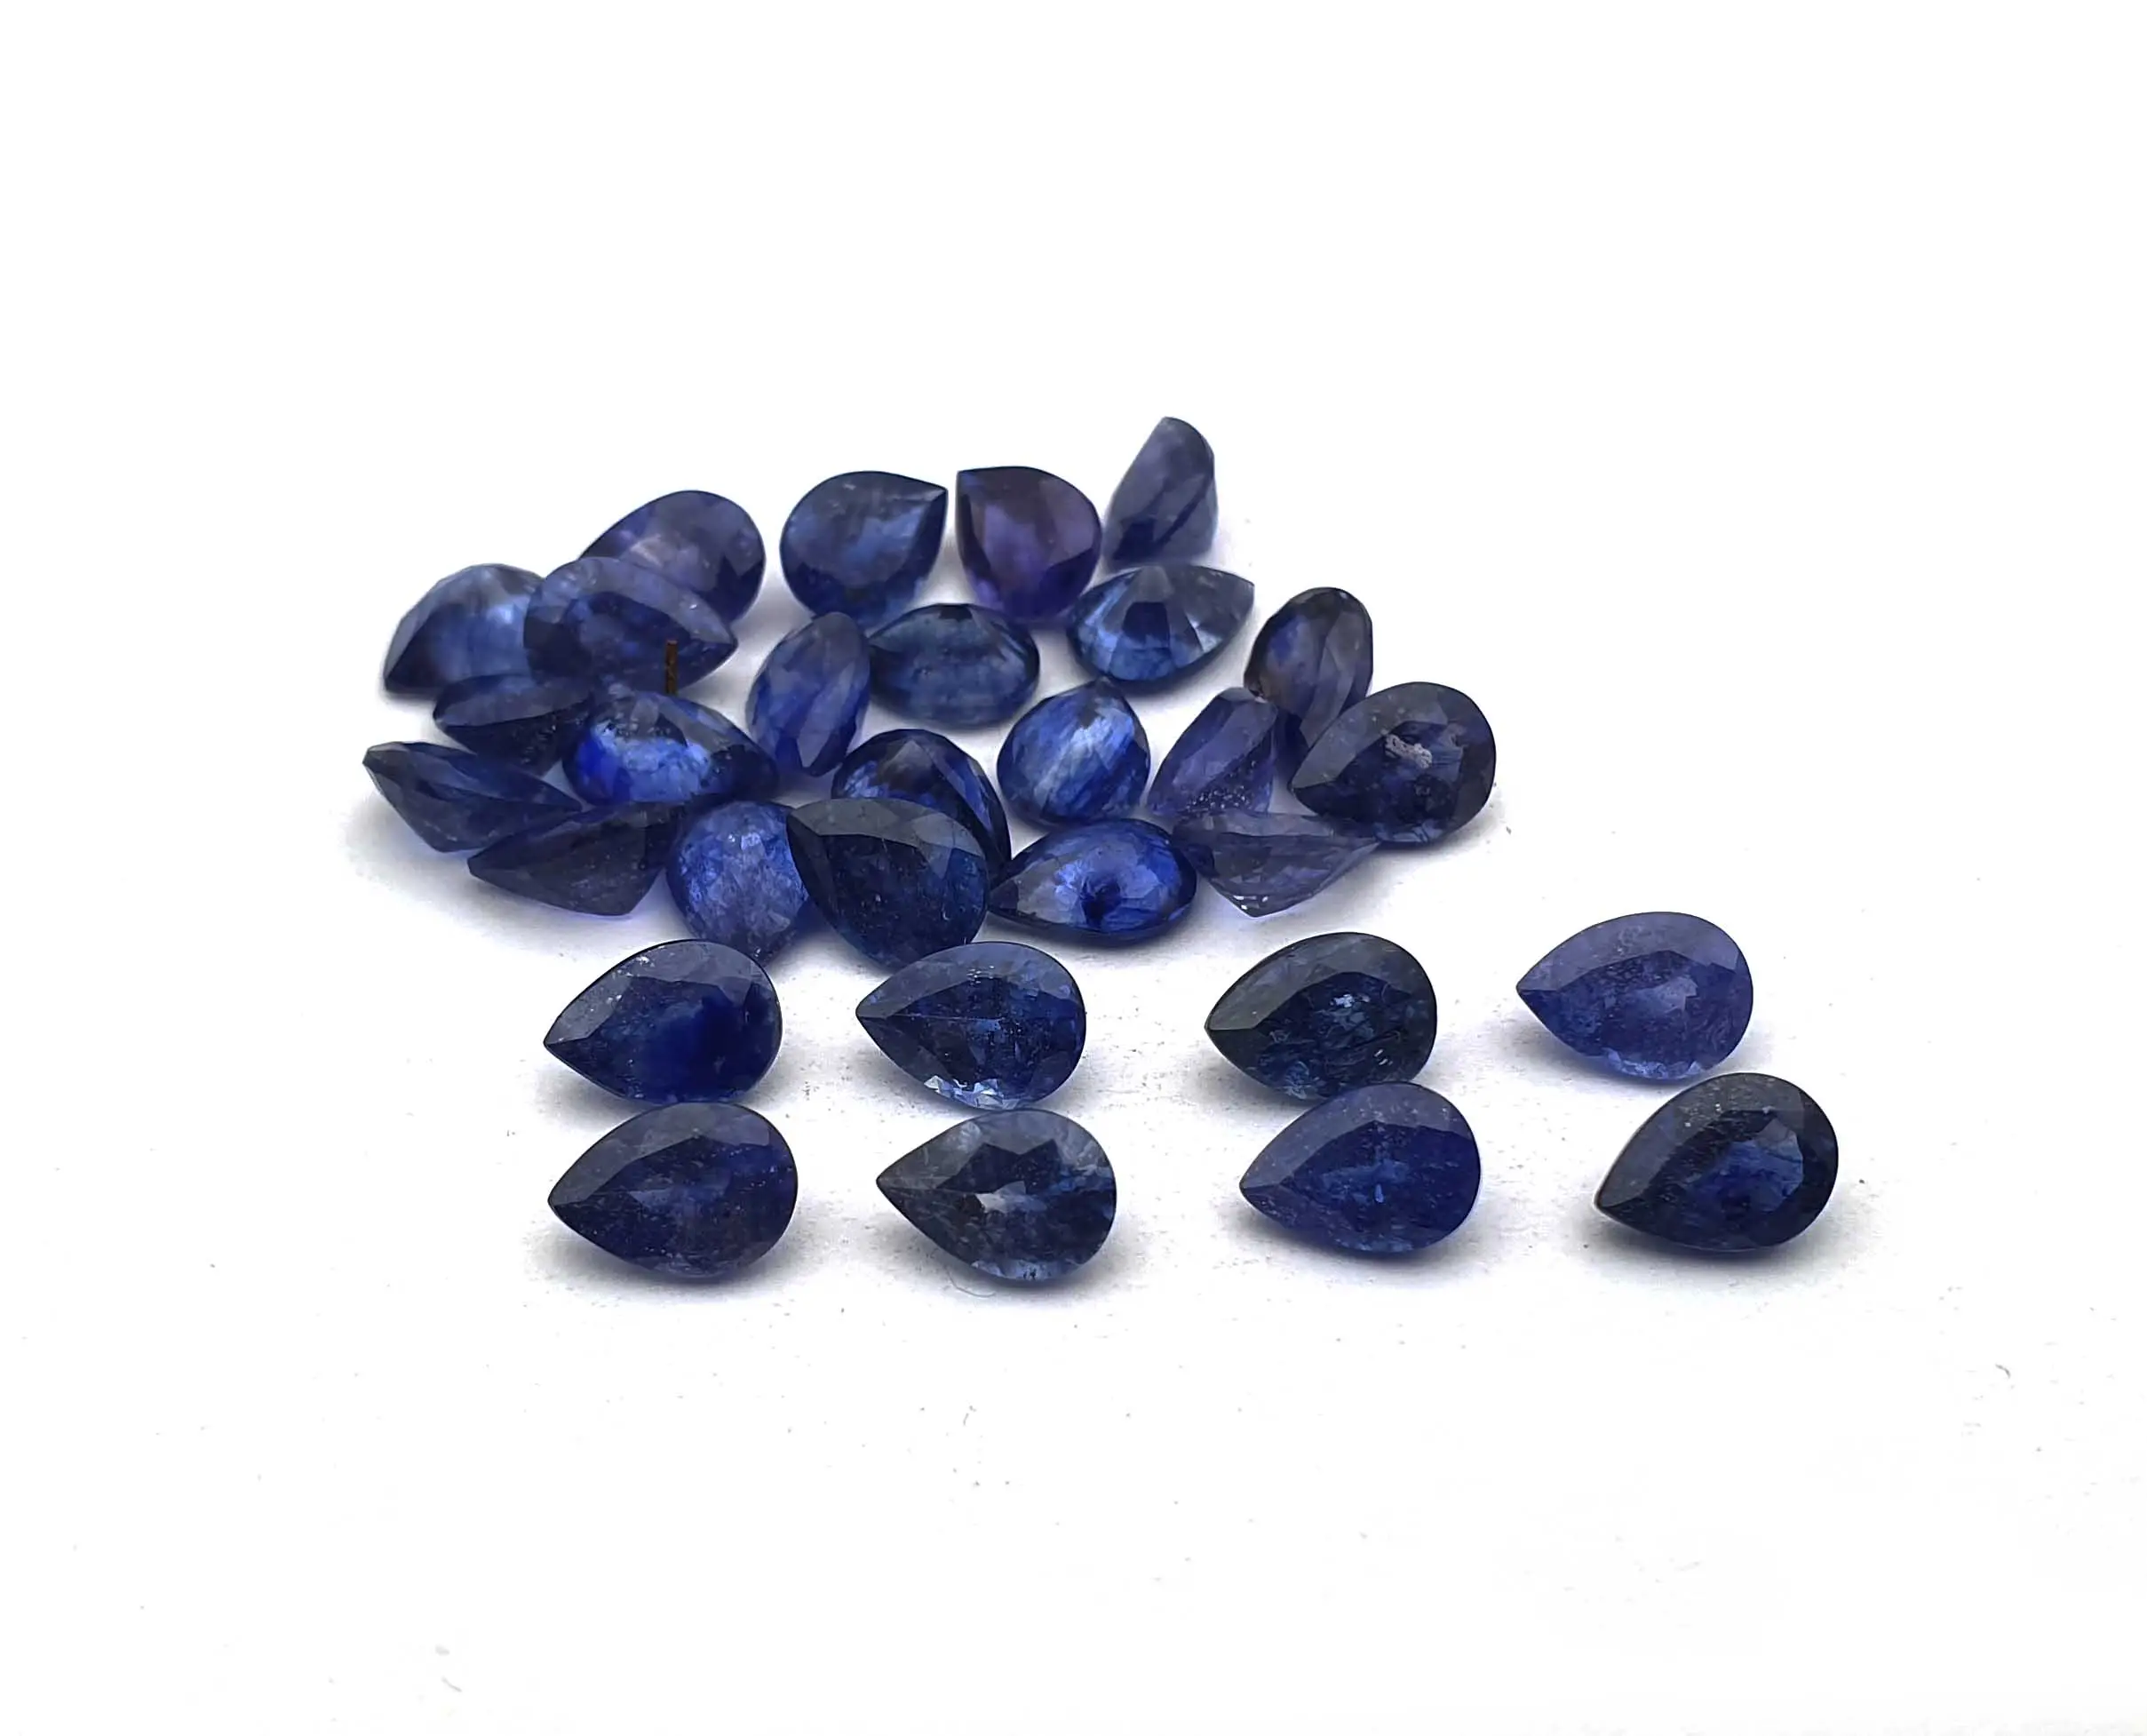 Blue Sapphire Mix Pear Cut Gemstone Lot, Sapphire Faceted Loose Stone ,Natural Sapphire For Jewelry Making 3x5 TO 10x14 mm